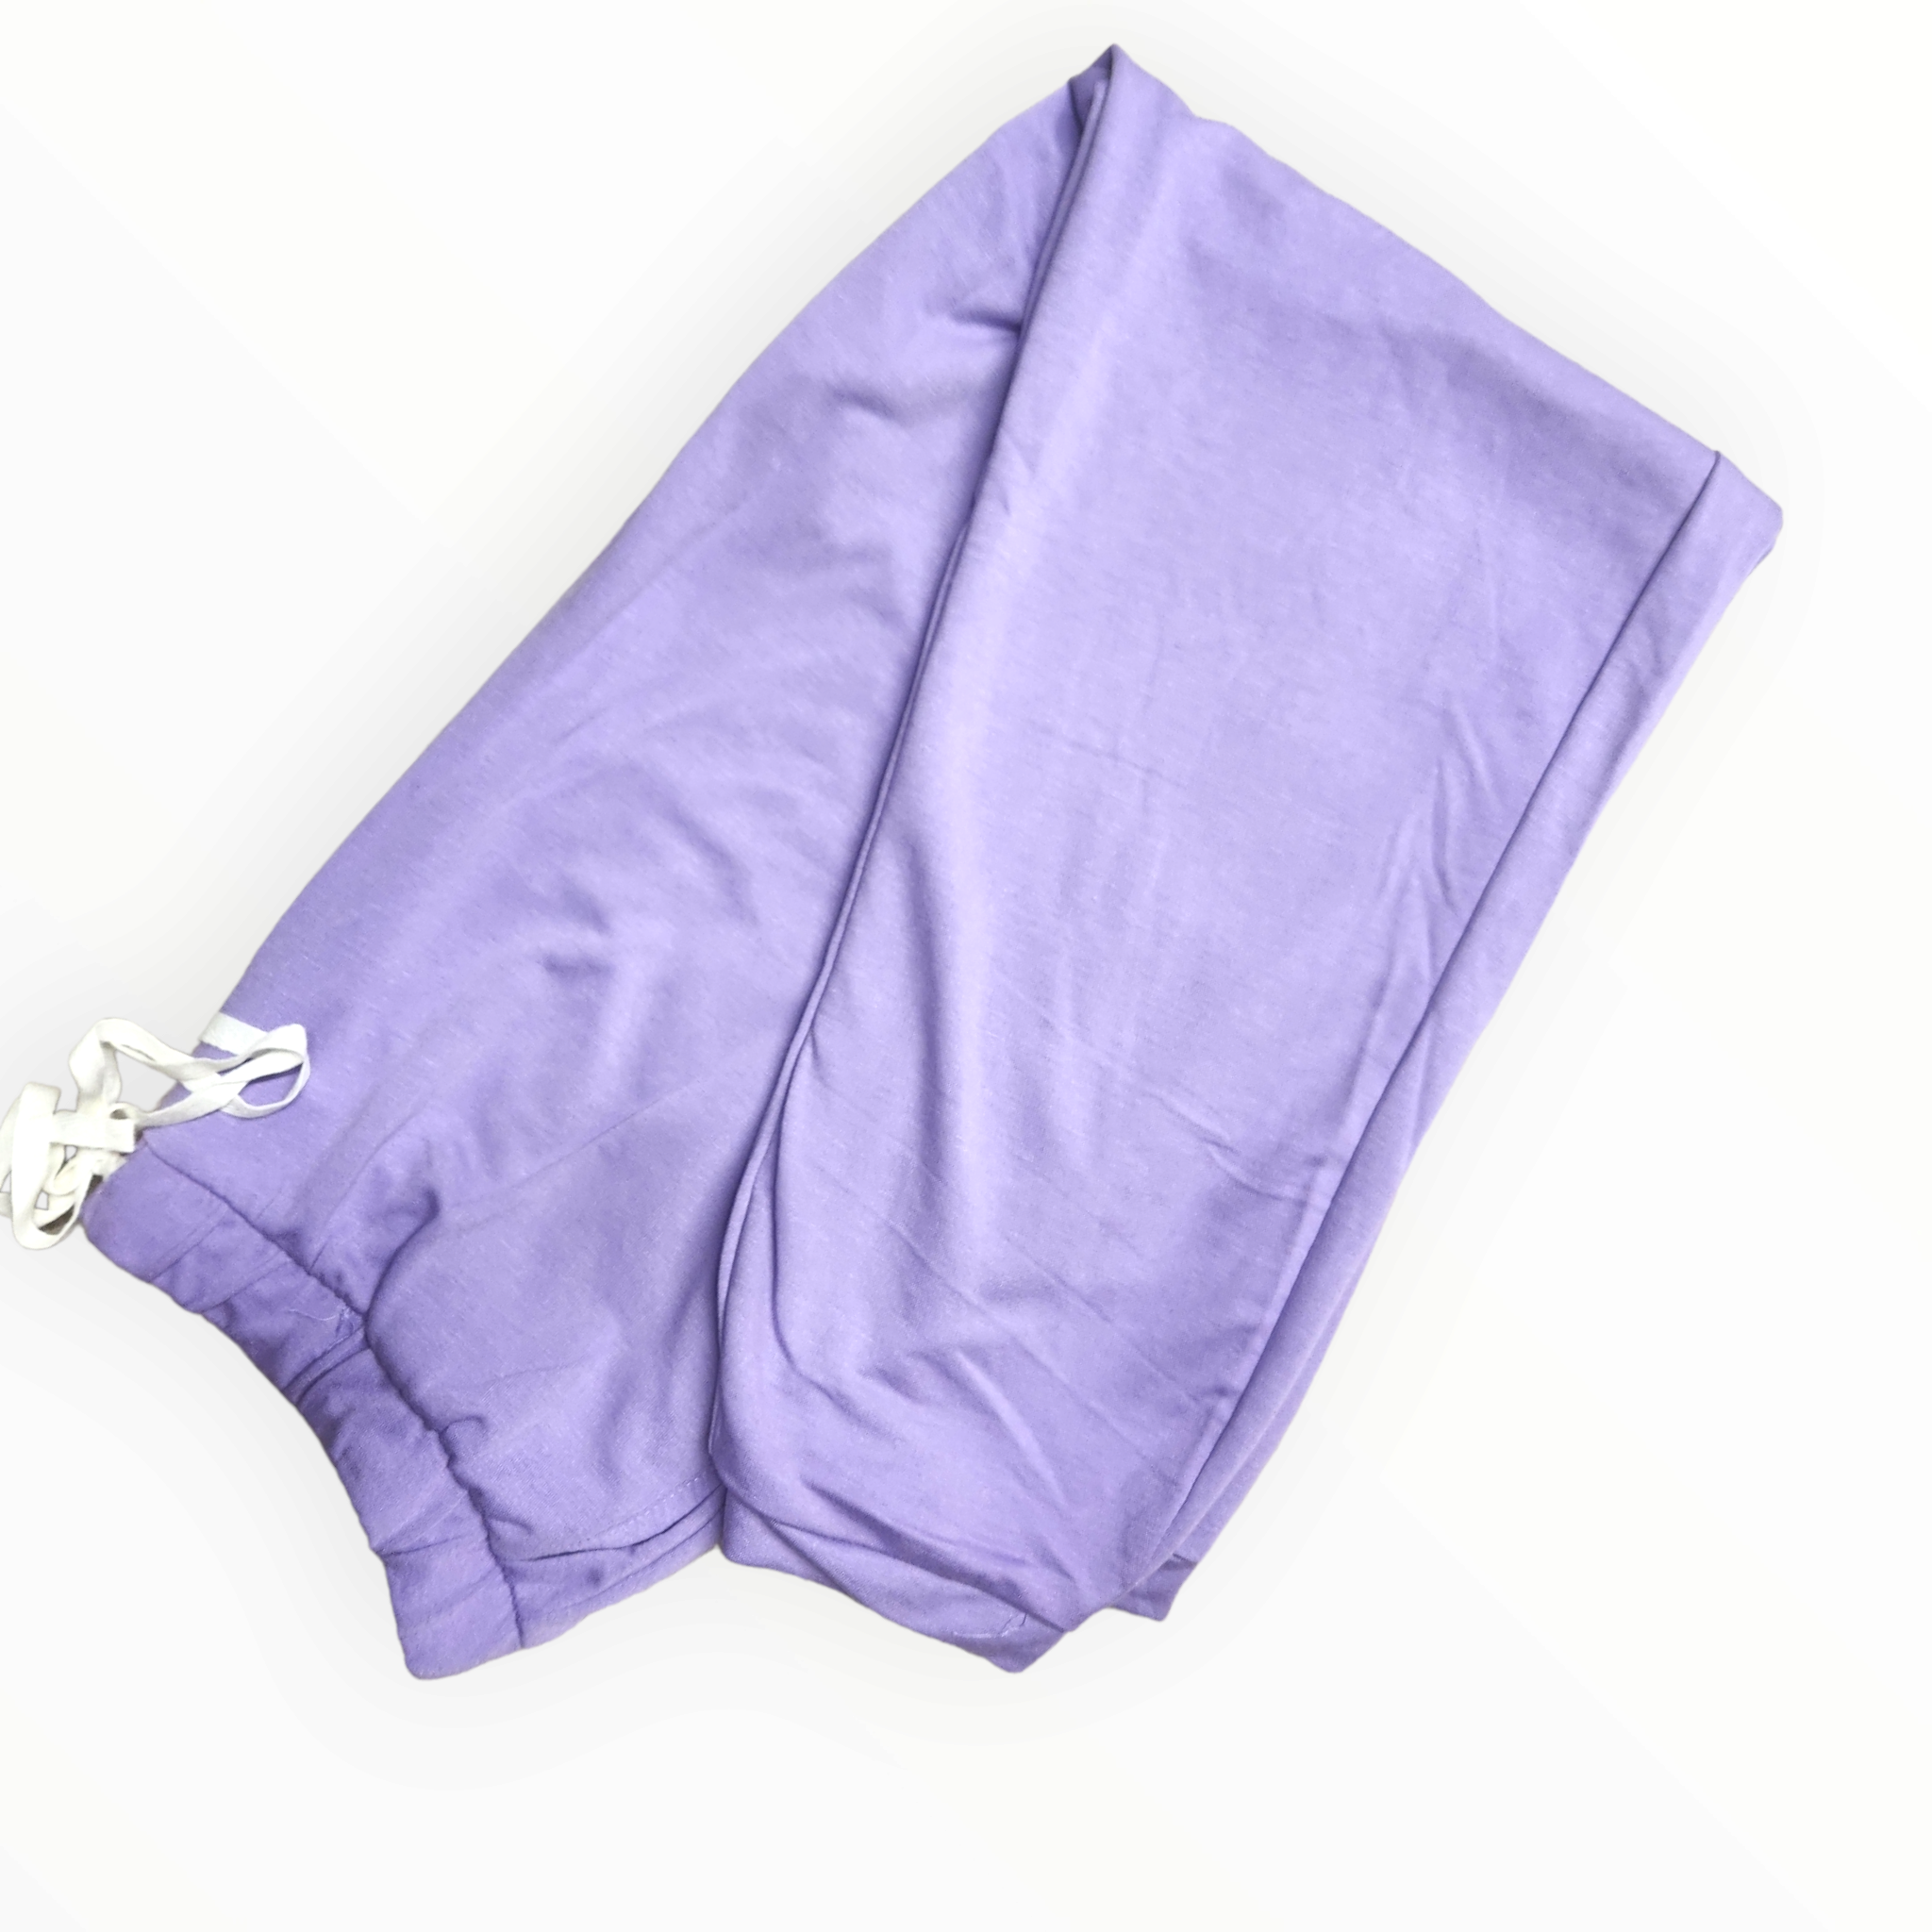 Soft French Terry Jogger Pants - Plus - Lavendar-Joggers-LouisGeorge Boutique-LouisGeorge Boutique, Women’s Fashion Boutique Located in Trussville, Alabama